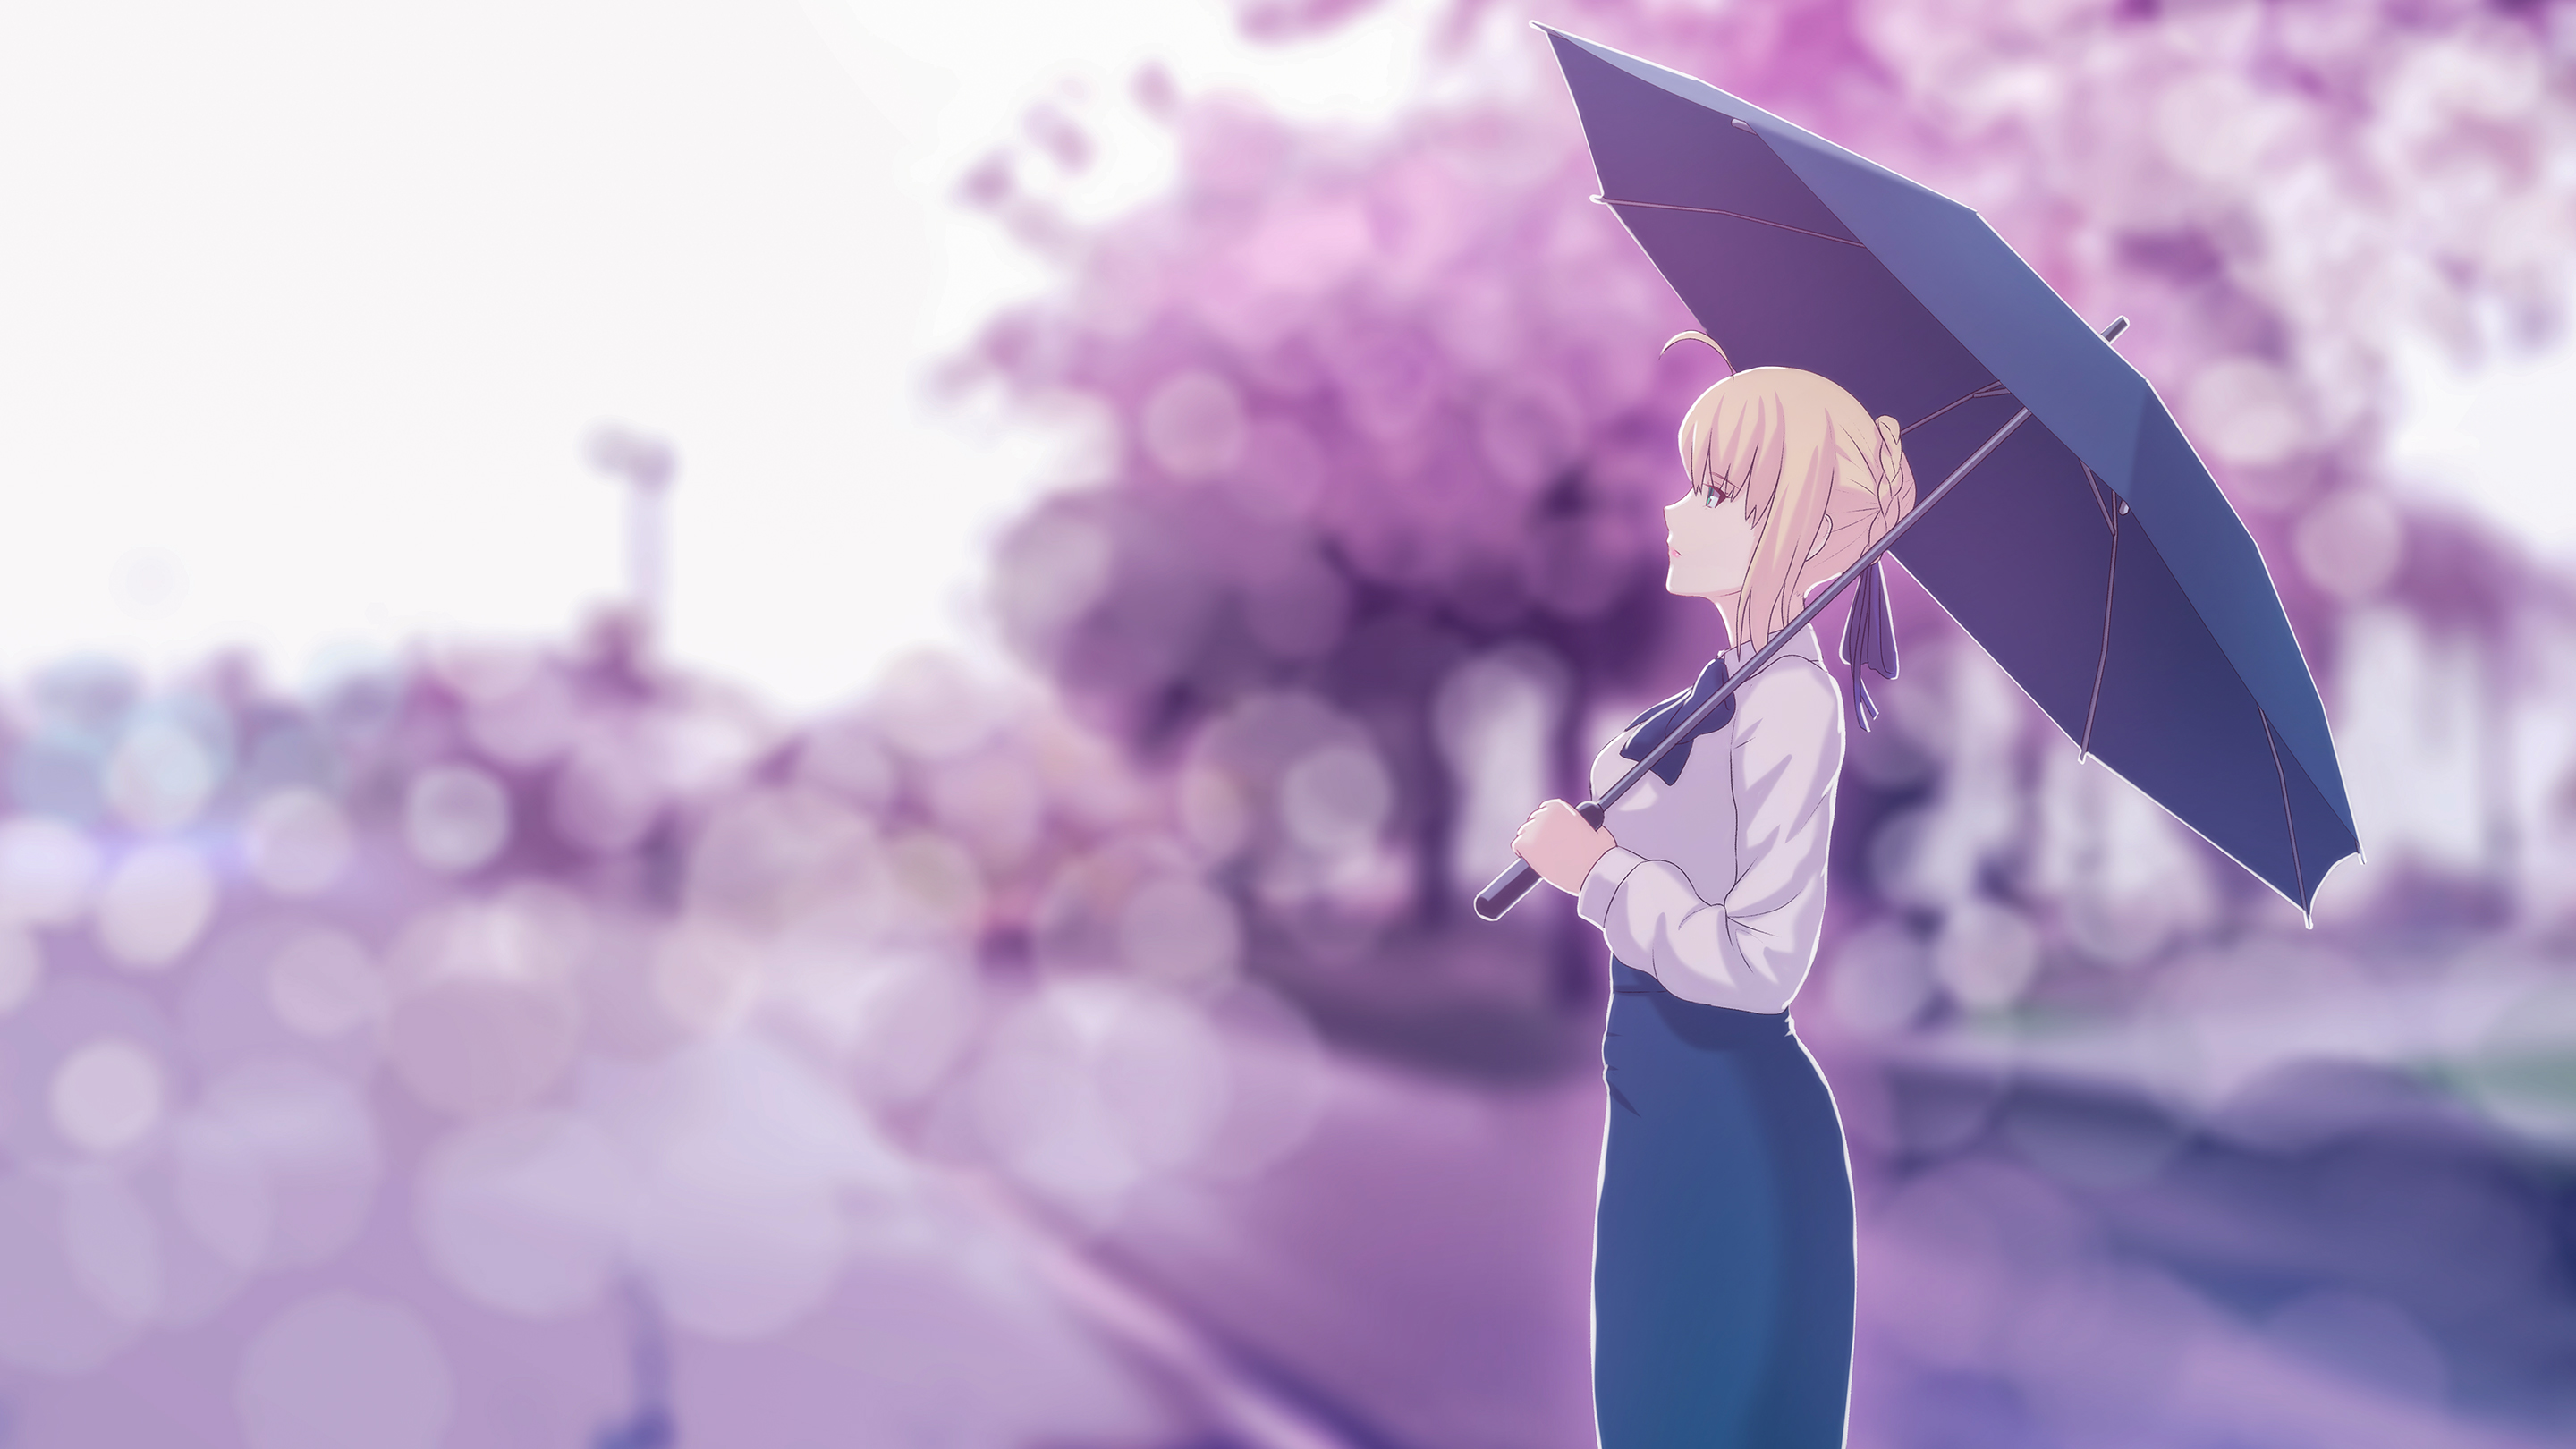 Saber Fate Stay Night Artwork Hd Artist 4k Wallpapers Images Backgrounds Photos And Pictures